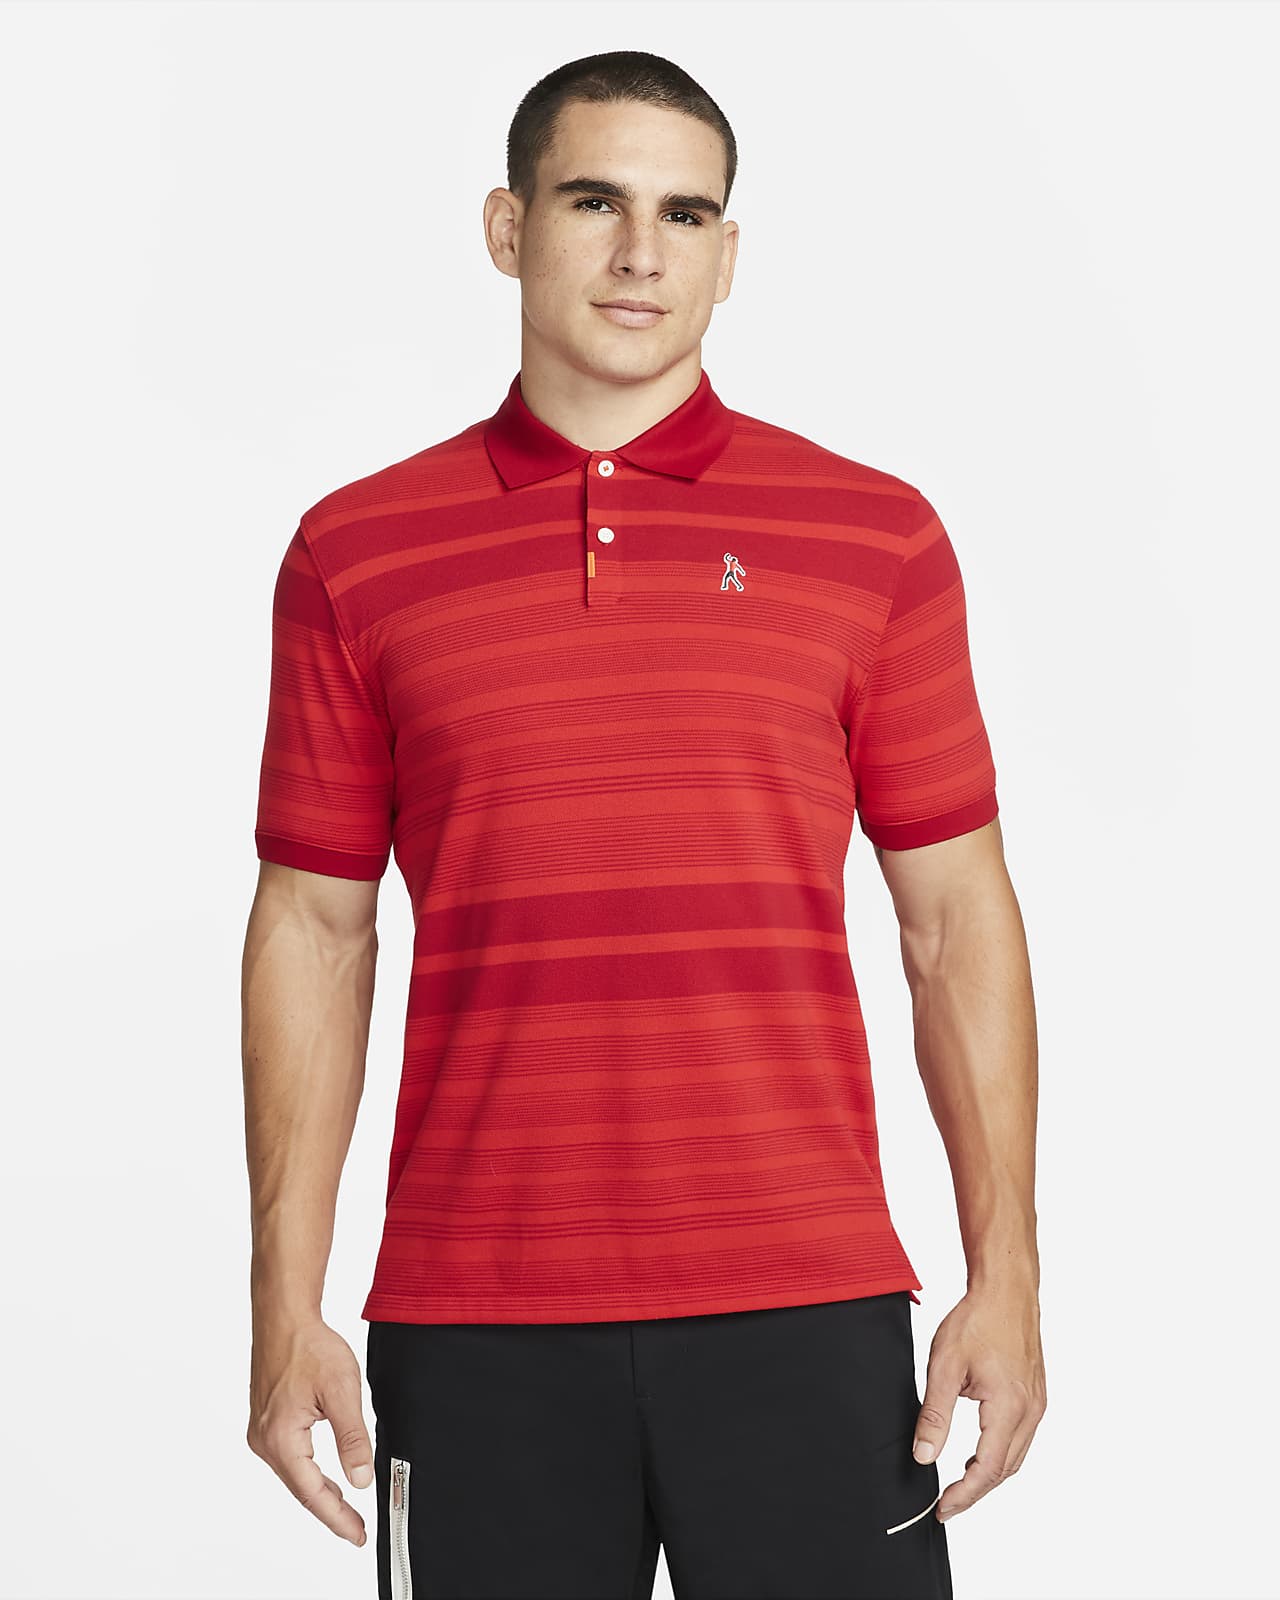 The Nike Polo Tiger Woods Men's Slim-Fit Polo